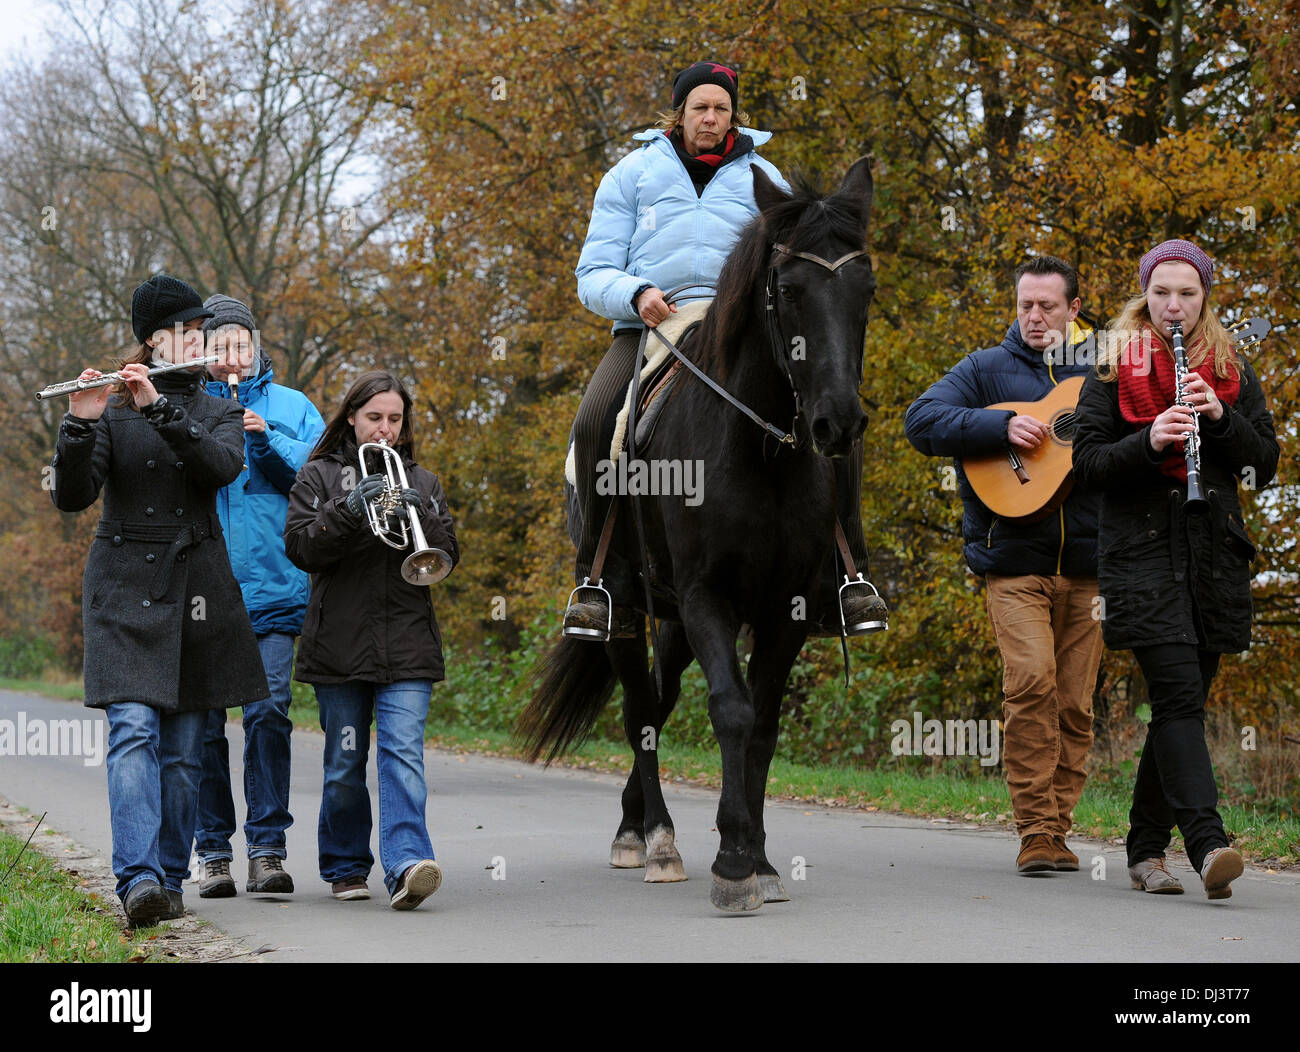 Martfeld, Germany. 16th Nov, 2013. The course director Gwendolyn Schubert (L) plays on her flute to the beat of the hooves of the horse 'Jemala' wich is ridden by Dagmar Fuchs as well as Kristin Mielke on the fipple pipe (2-R), Kim Dinter on the trumpet, Stephanie Schmidt on the clarinet and Udo Schneider on the guitar follow the beat in Martfeld, Germany, 16 November 2013. The course shows musicians how to follow the beat of the gait of a horse, which then can be considers as a conductor. Photo: Ingo Wagner/dpa/Alamy Live News Stock Photo